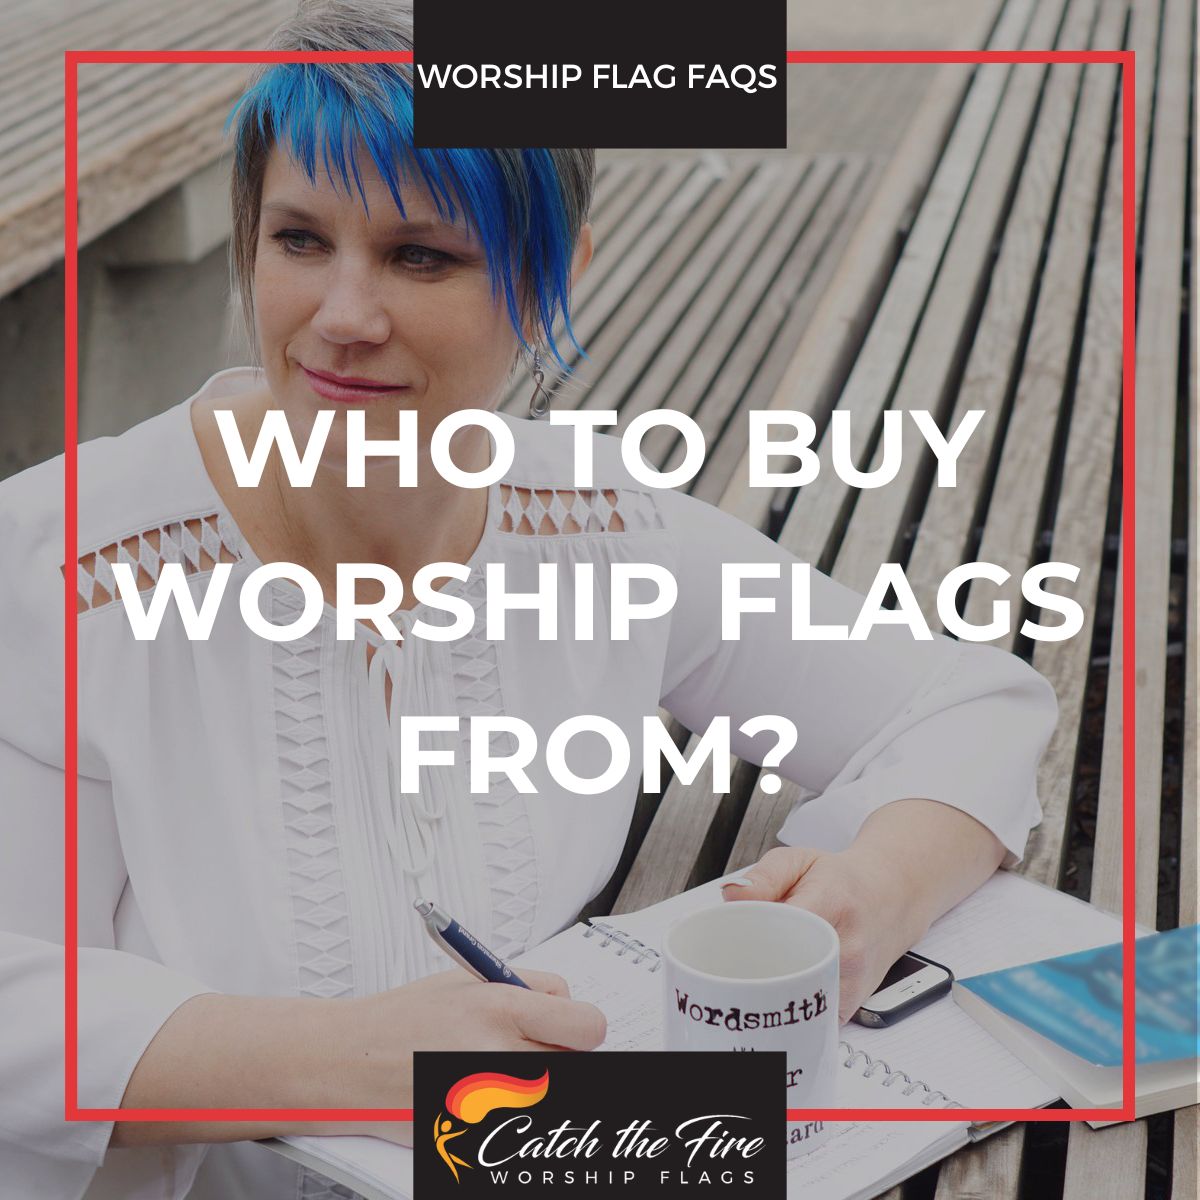 woman writing and holding coffee mug image with text and catch the fire worship flags logo